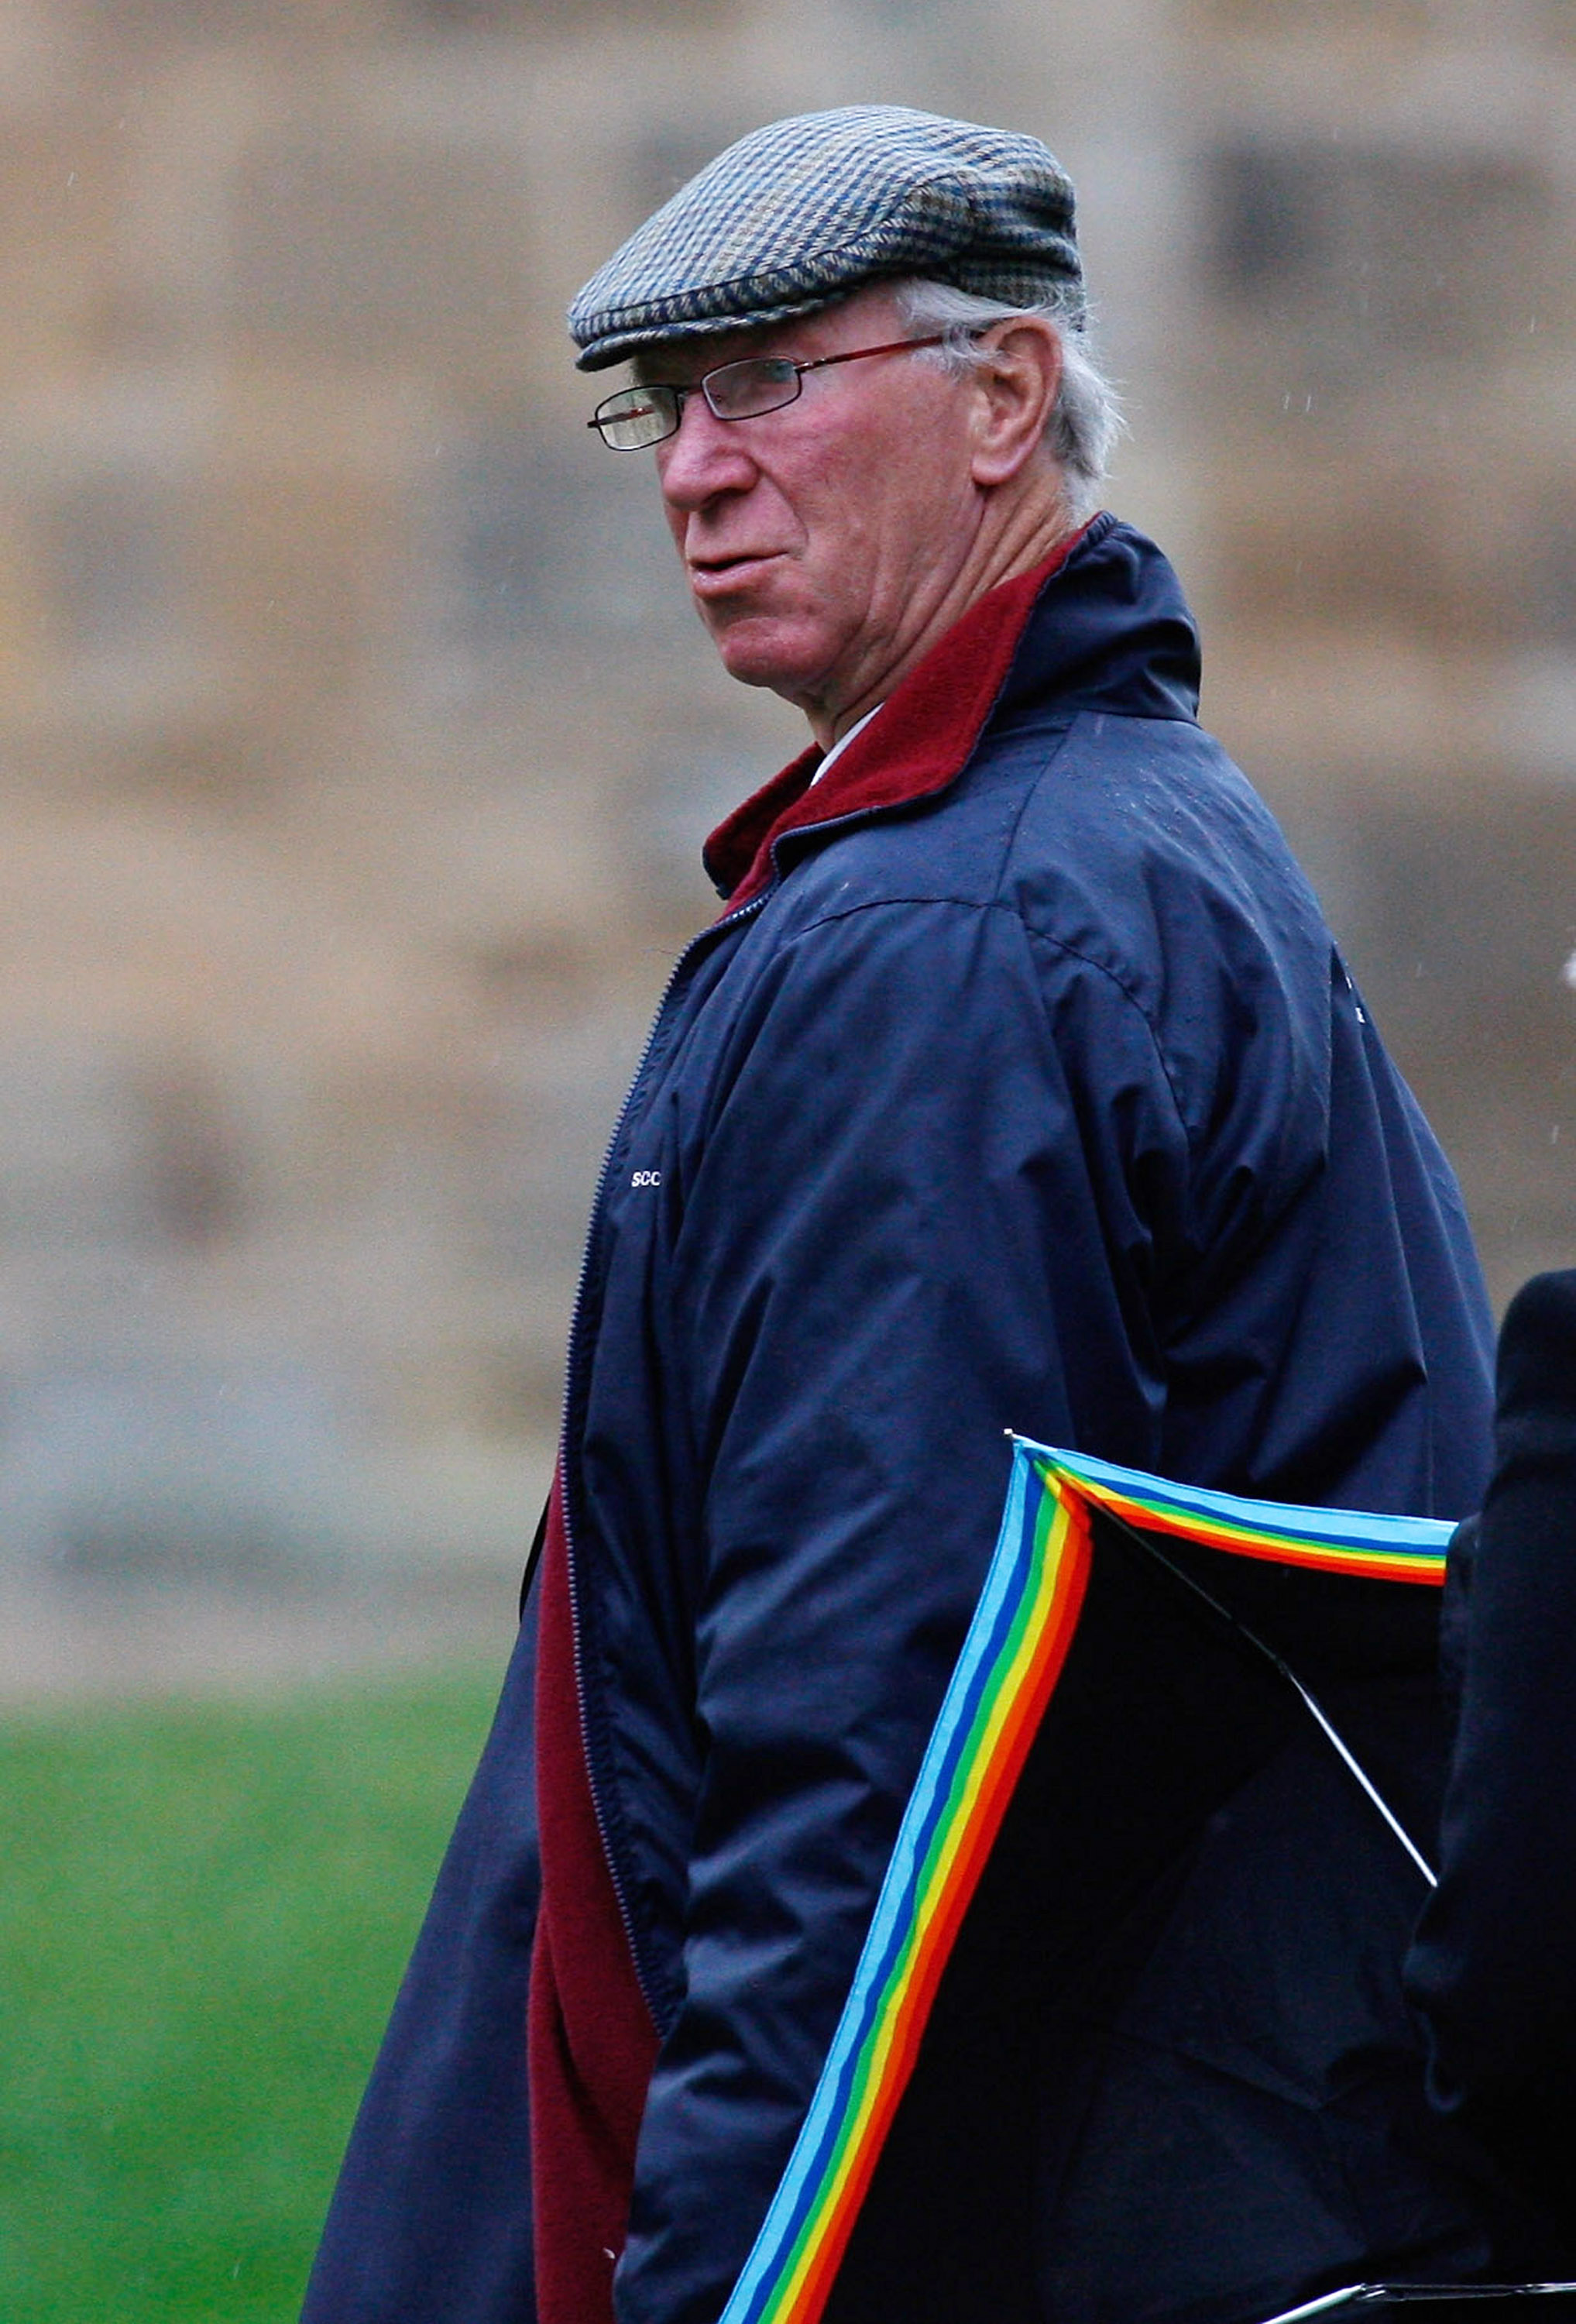 DURHAM, ENGLAND - SEPTEMBER 21:  Former England footballer Jack Charlton arrives before the Sir Bobby Robson Memorial Service at Durham Cathedral on September 21, 2009 in Durham, England. Thousands of football fans are expected to pay tribute to the forme